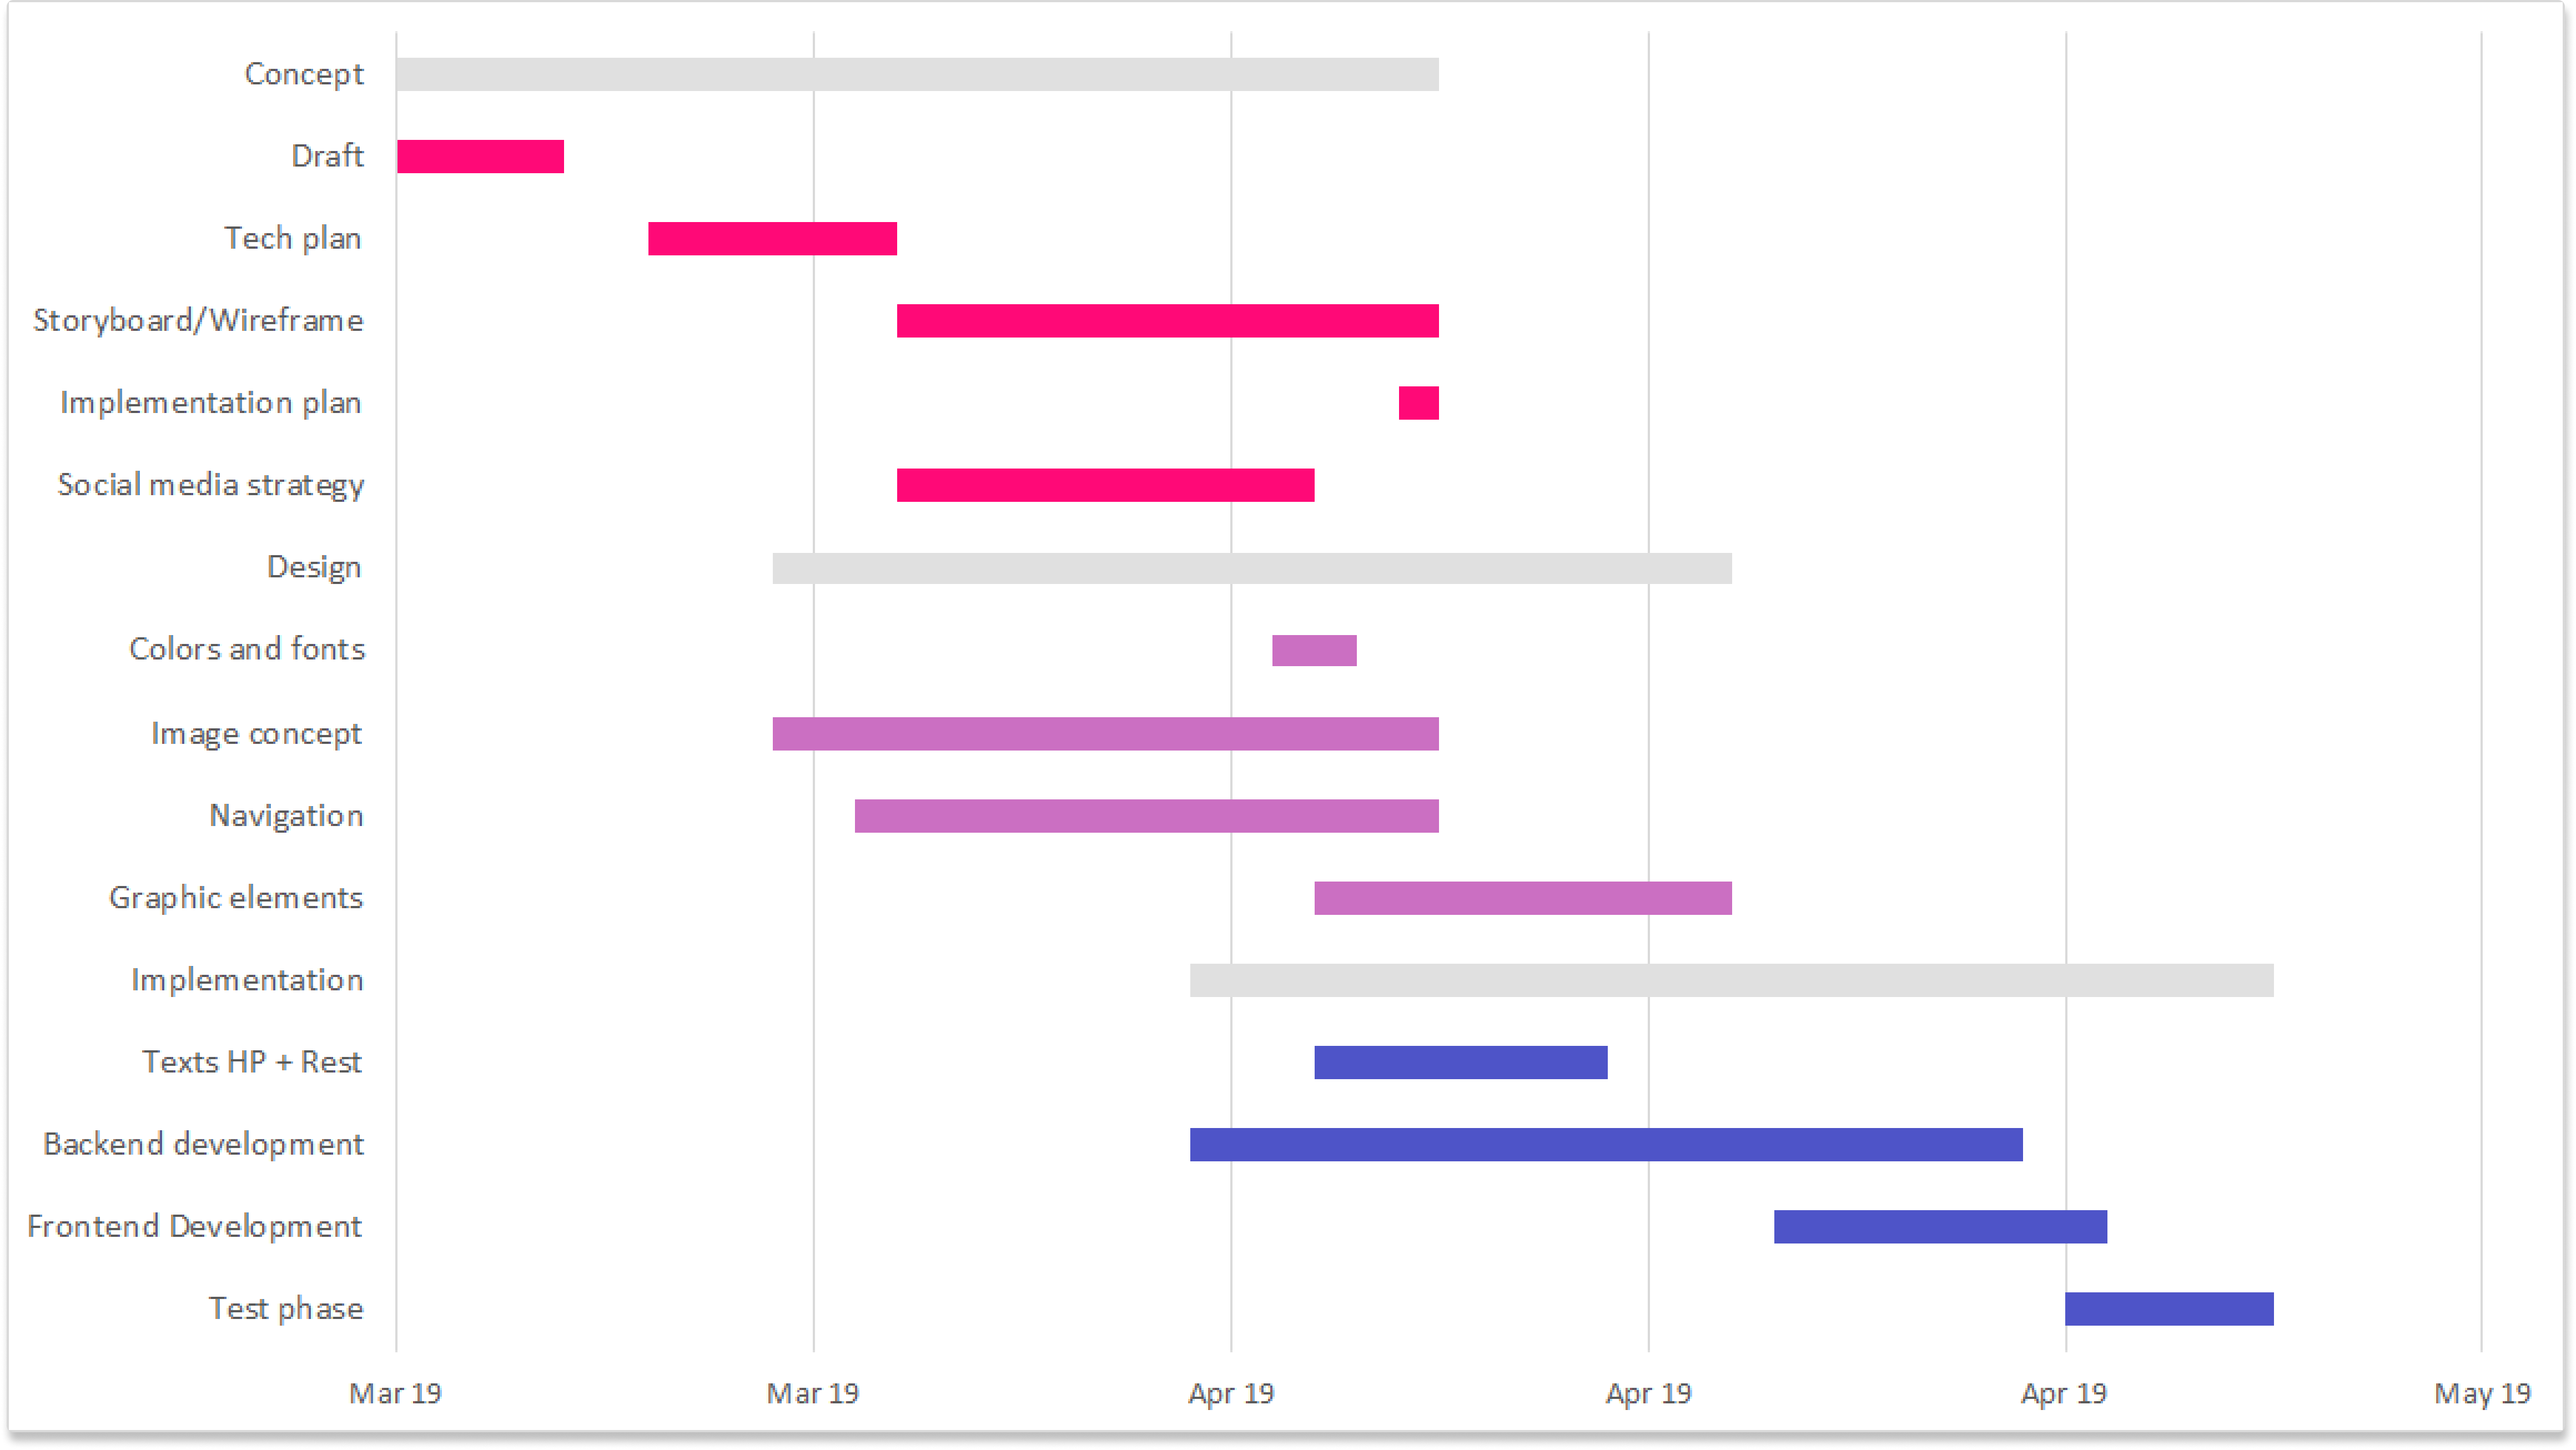 A Gantt chart created in Microsoft Excel